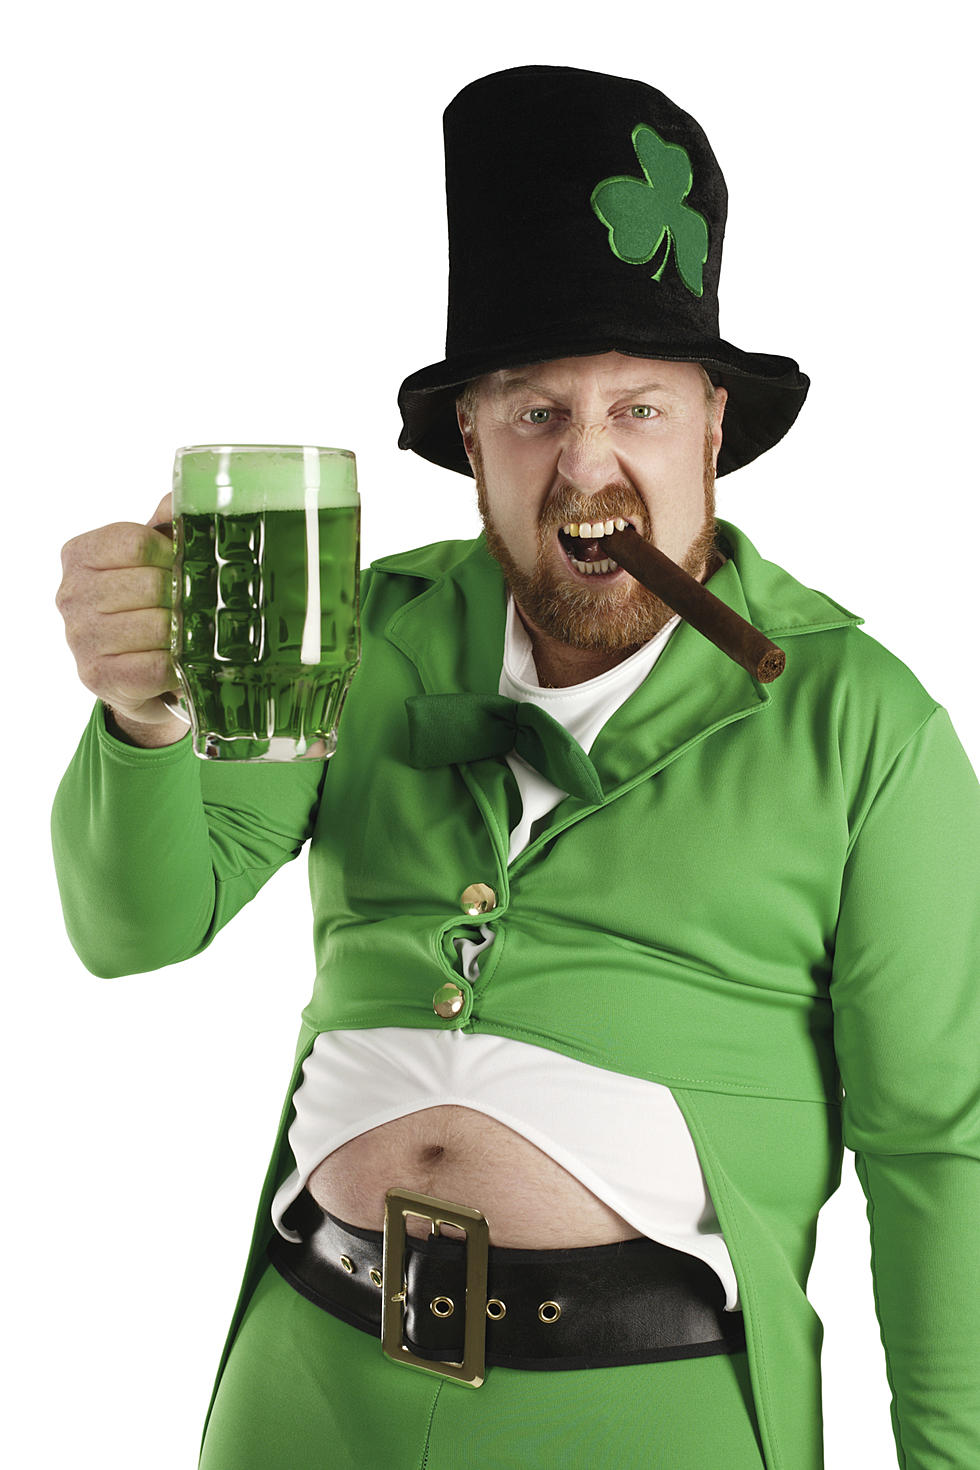 Texans Beware! If You’re Caught Doing This While Celebrating St. Patrick’s Day You’re Breaking The Law!